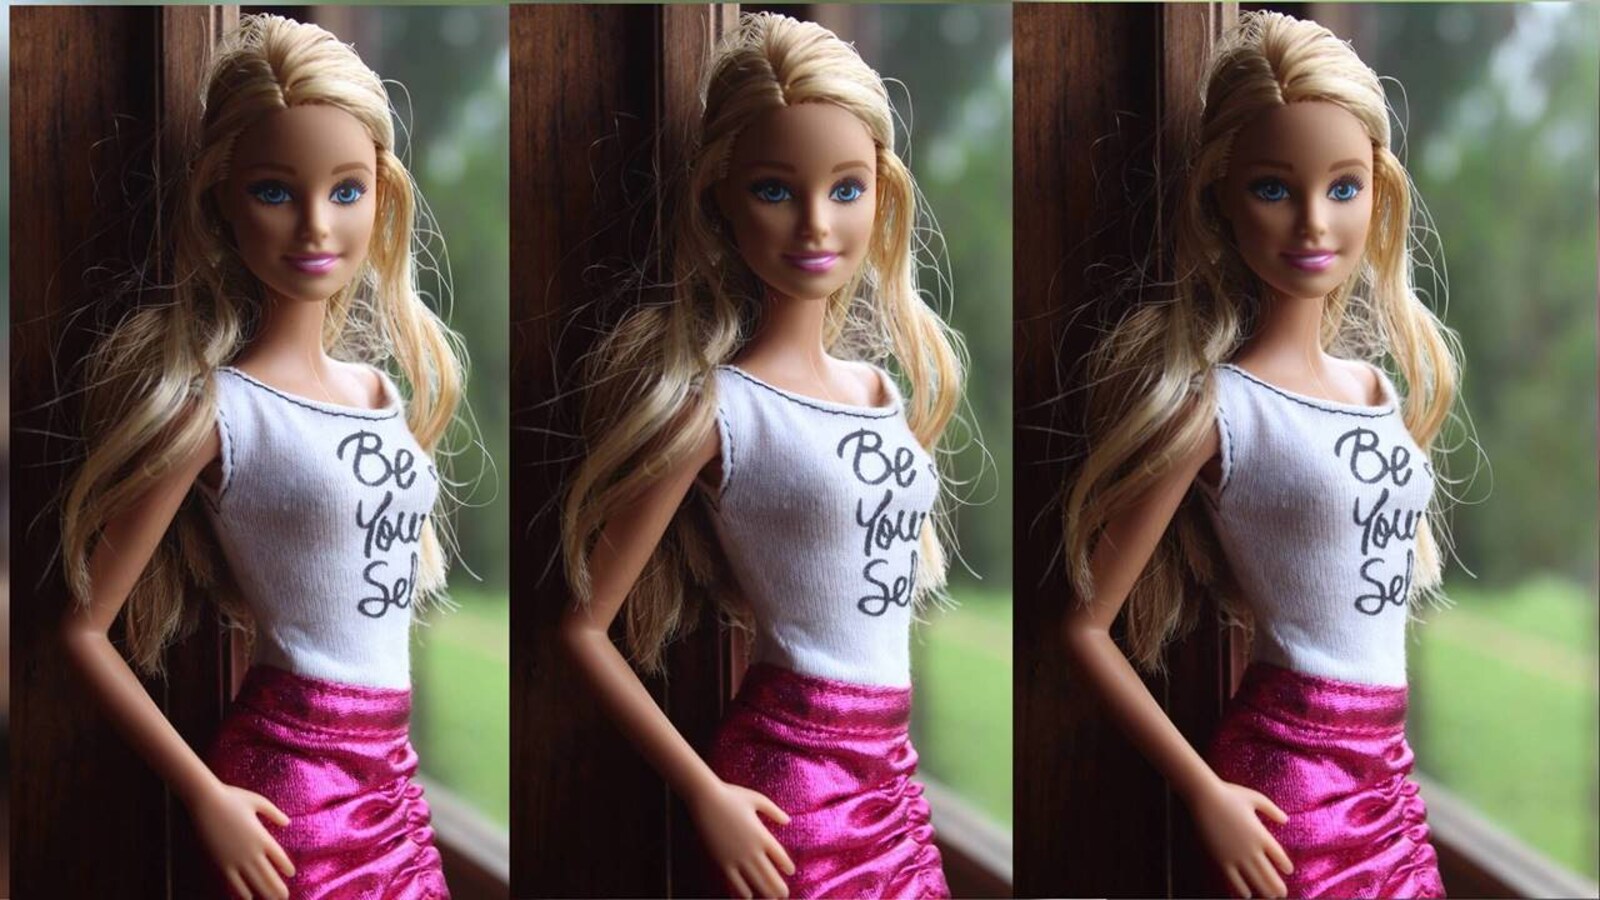 It's Barbie's world and consumers are living in it